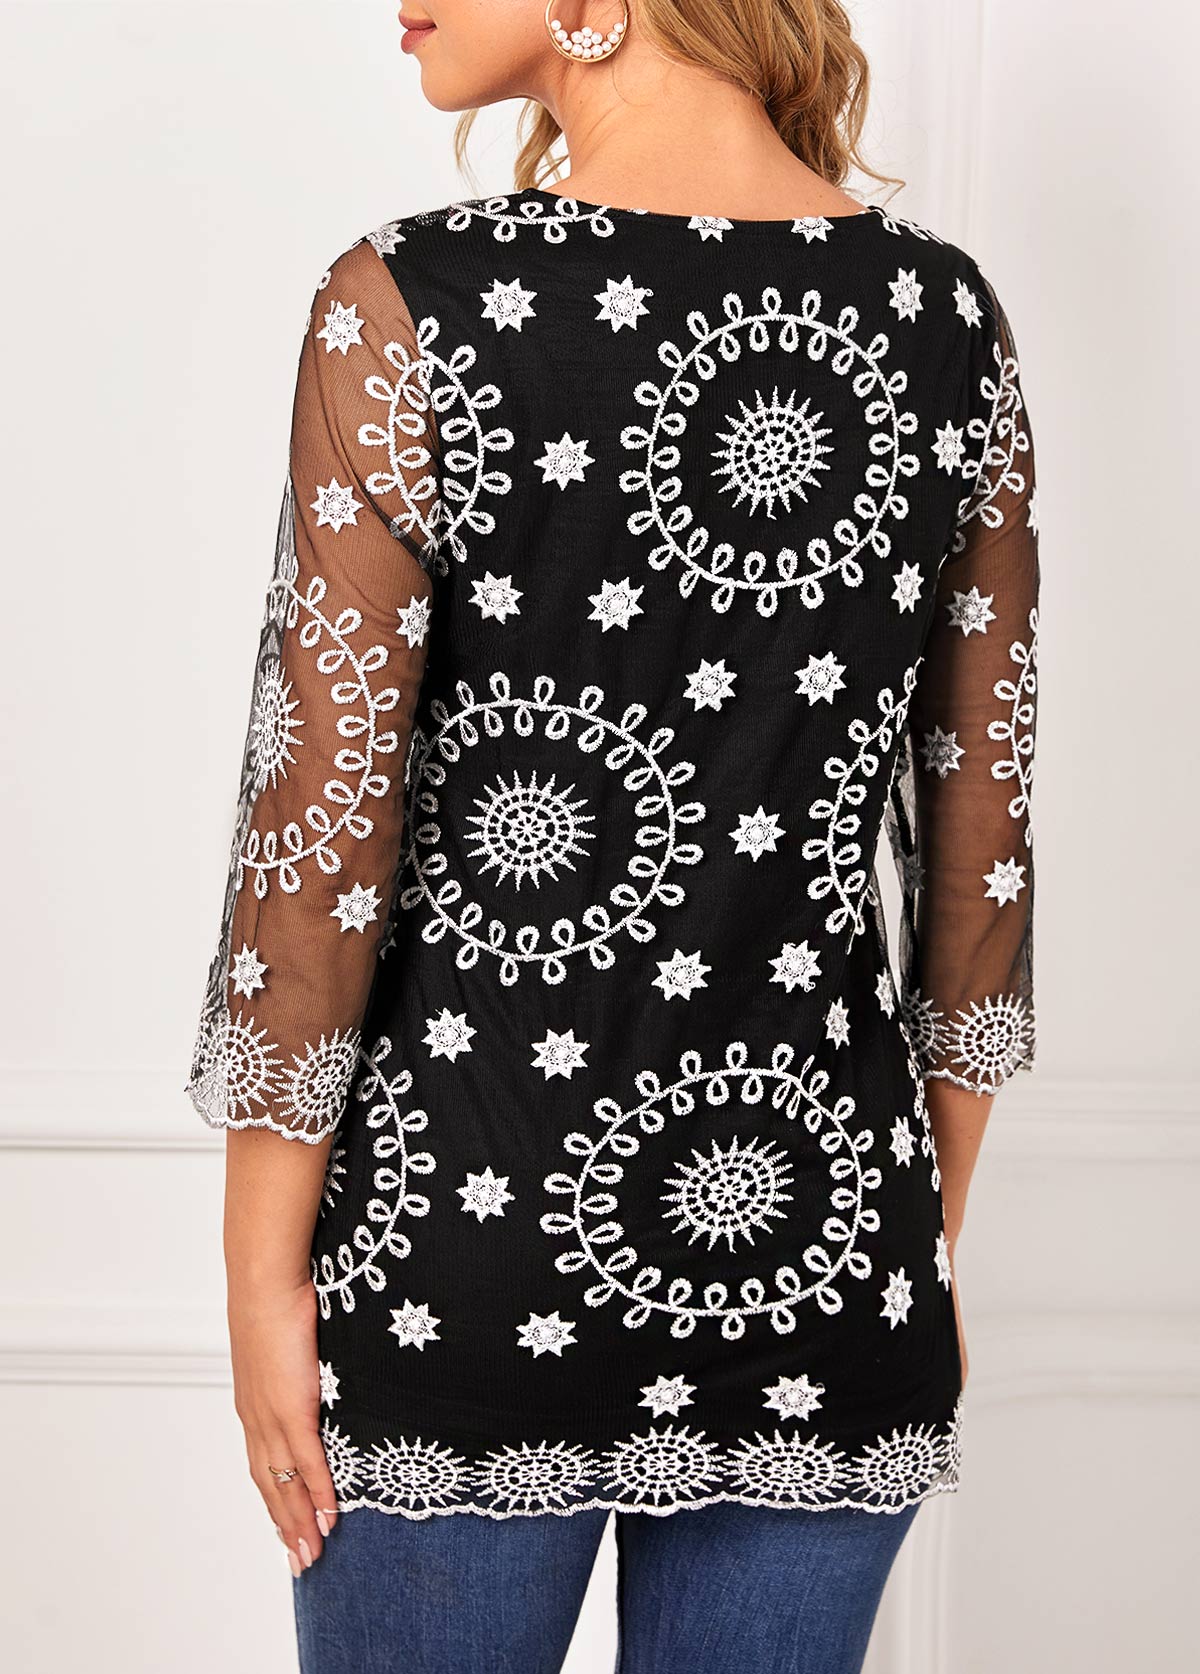 Embroidered Black Lace Stitching 3/4 Sleeve T Shirt